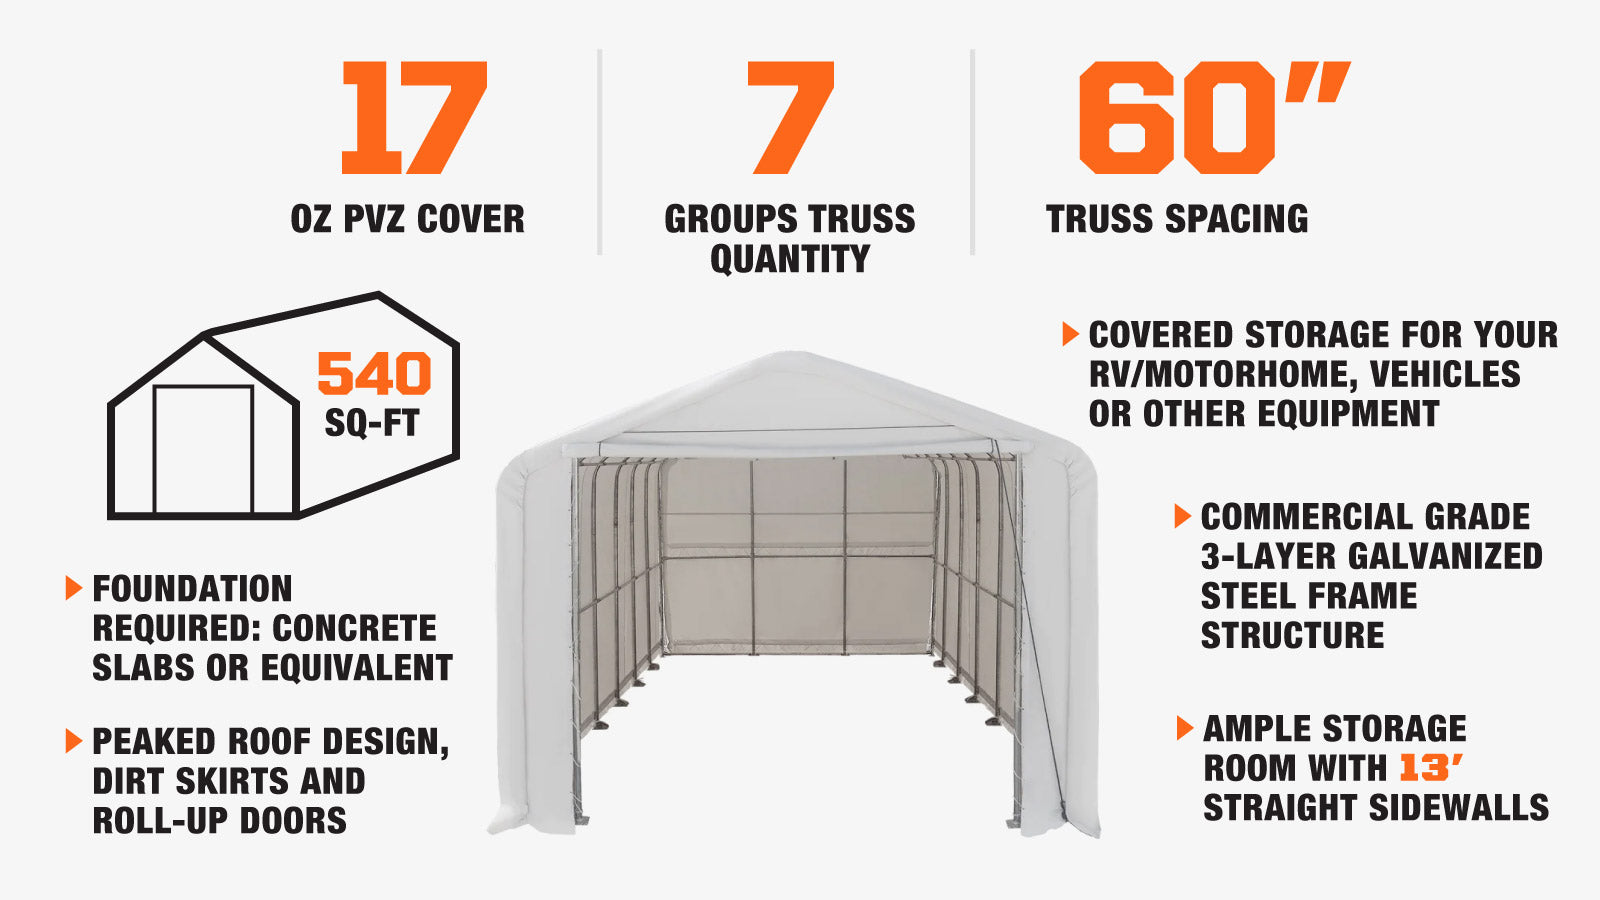 TMG Industrial 18’ x 30’ RV/Motorhome Storage Shelter, 17 oz PVC Fabric Cover, Front Roll-Up Door, Enclosed Rear Wall, 3-Layer Galvanized Steel Frame, 13’ Straight Sidewalls, TMG-ST1830-description-image